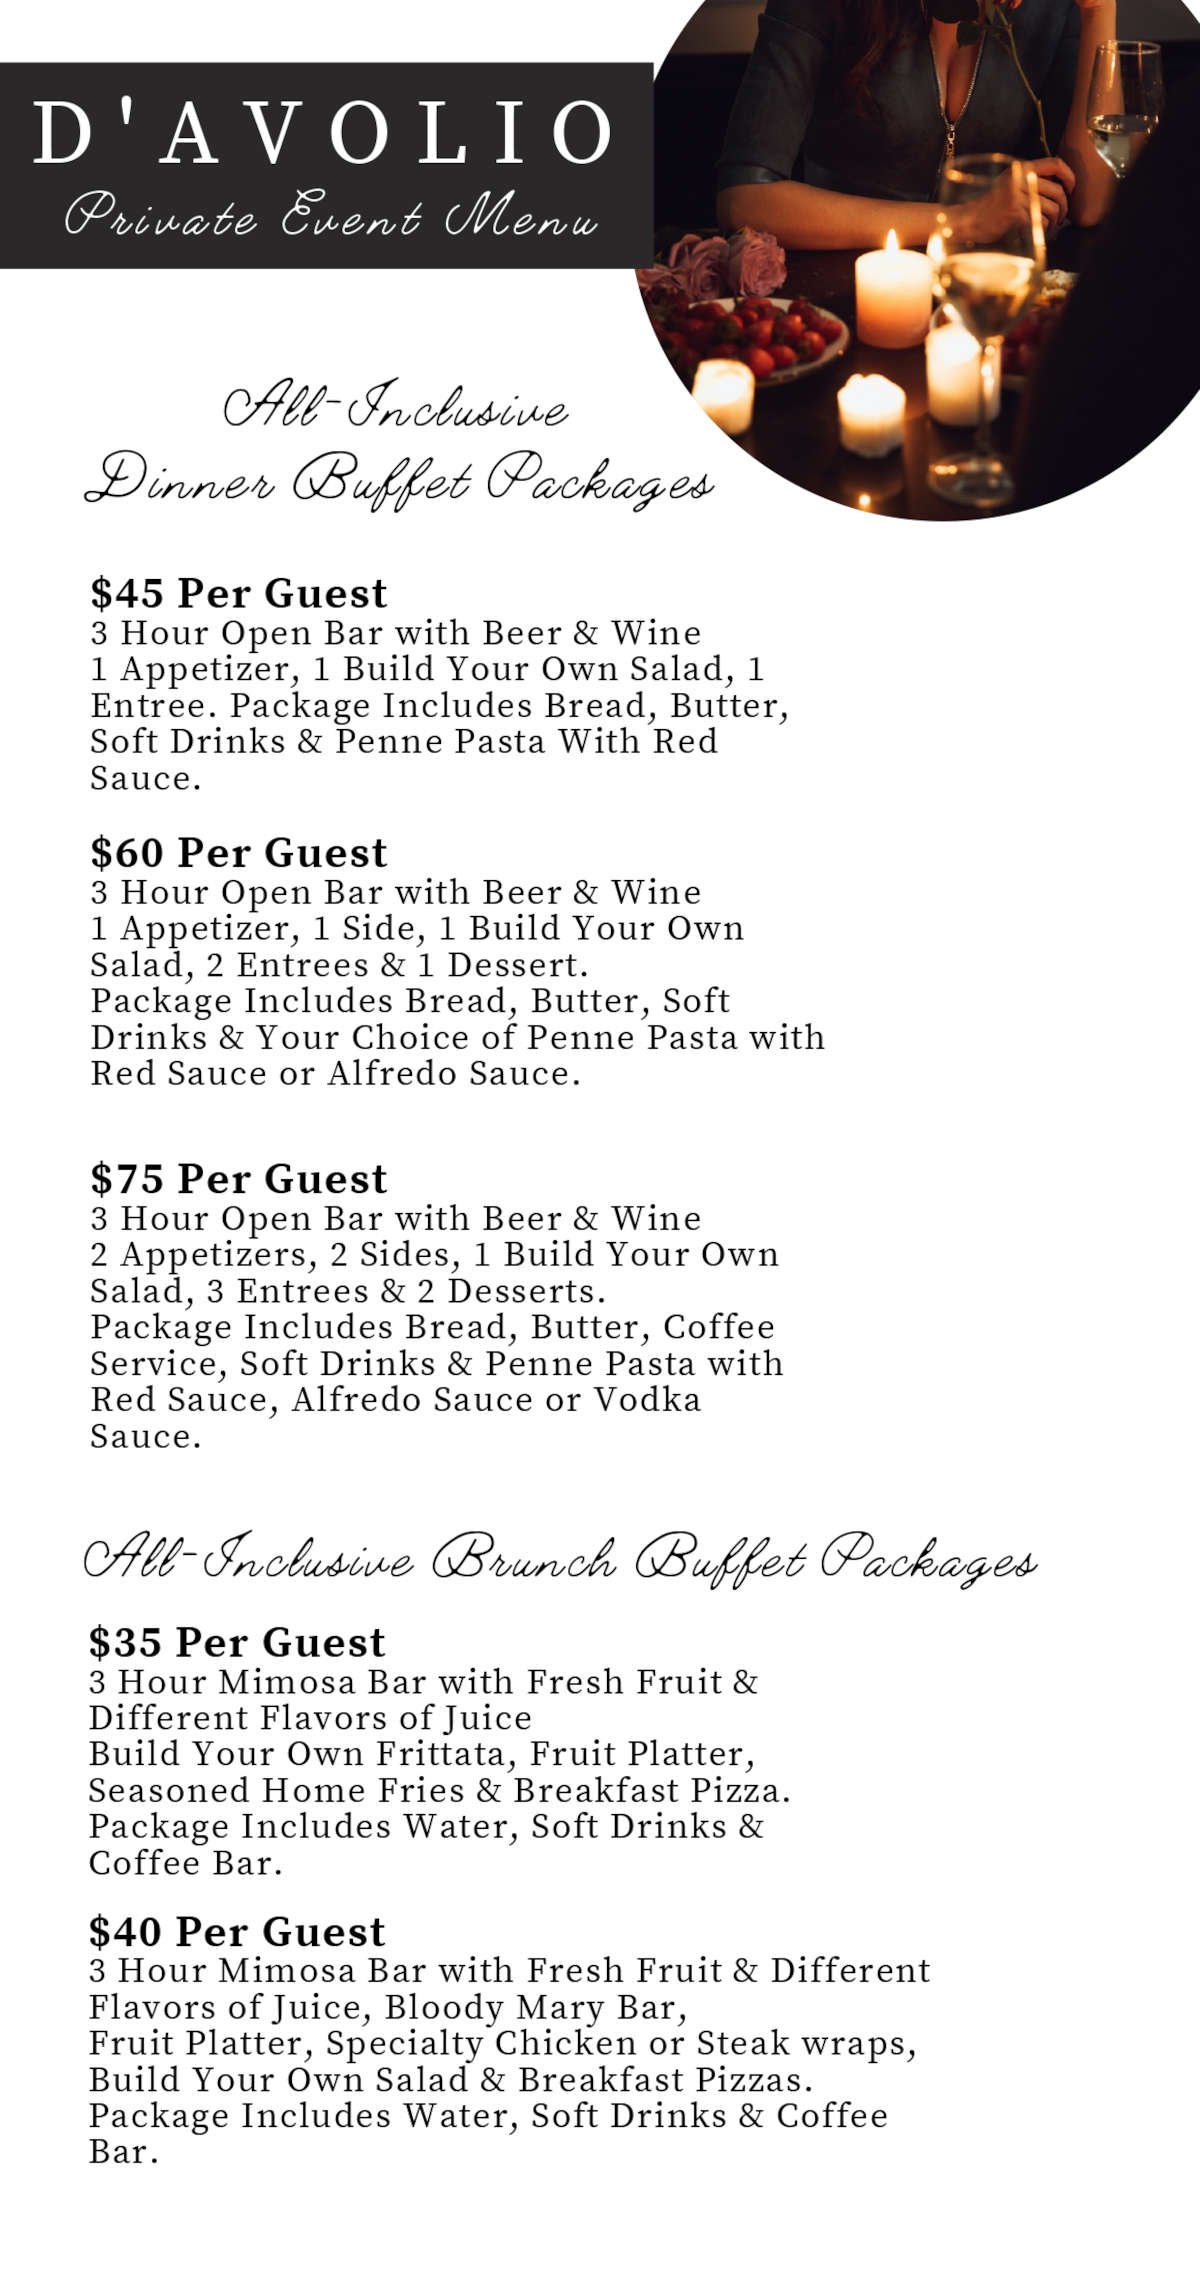 Davolois event menu all inclusive dinner bugget packages